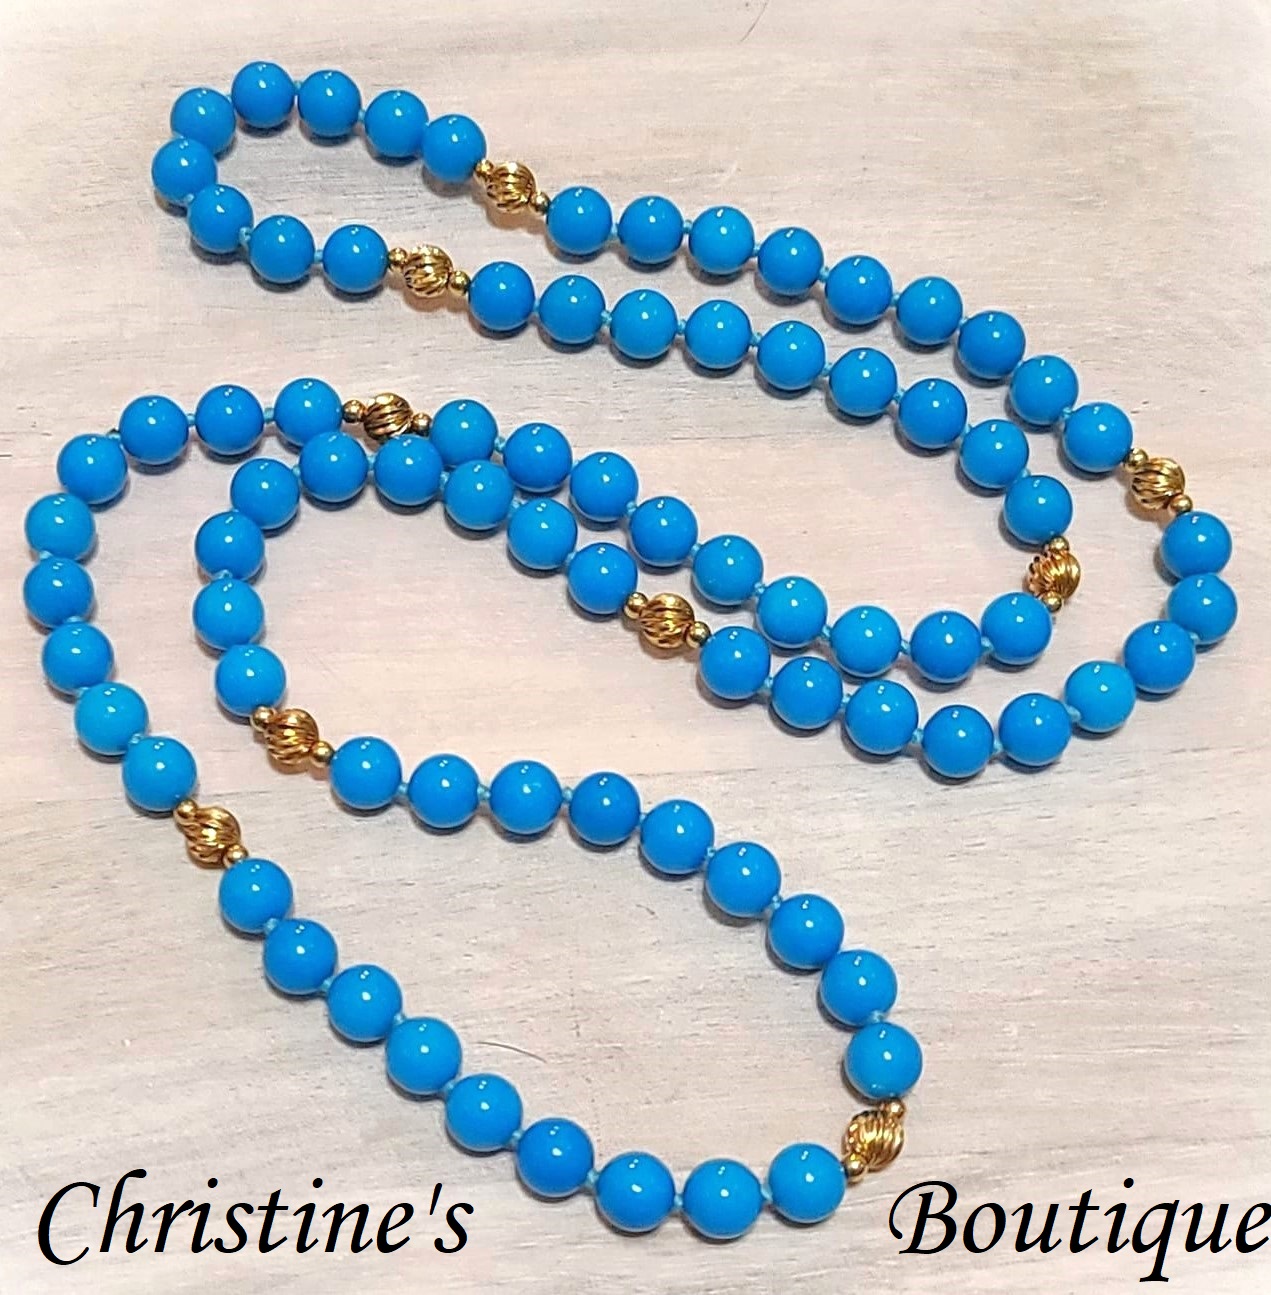 Turquoise glass beaded necklace with gold accent beads 30"